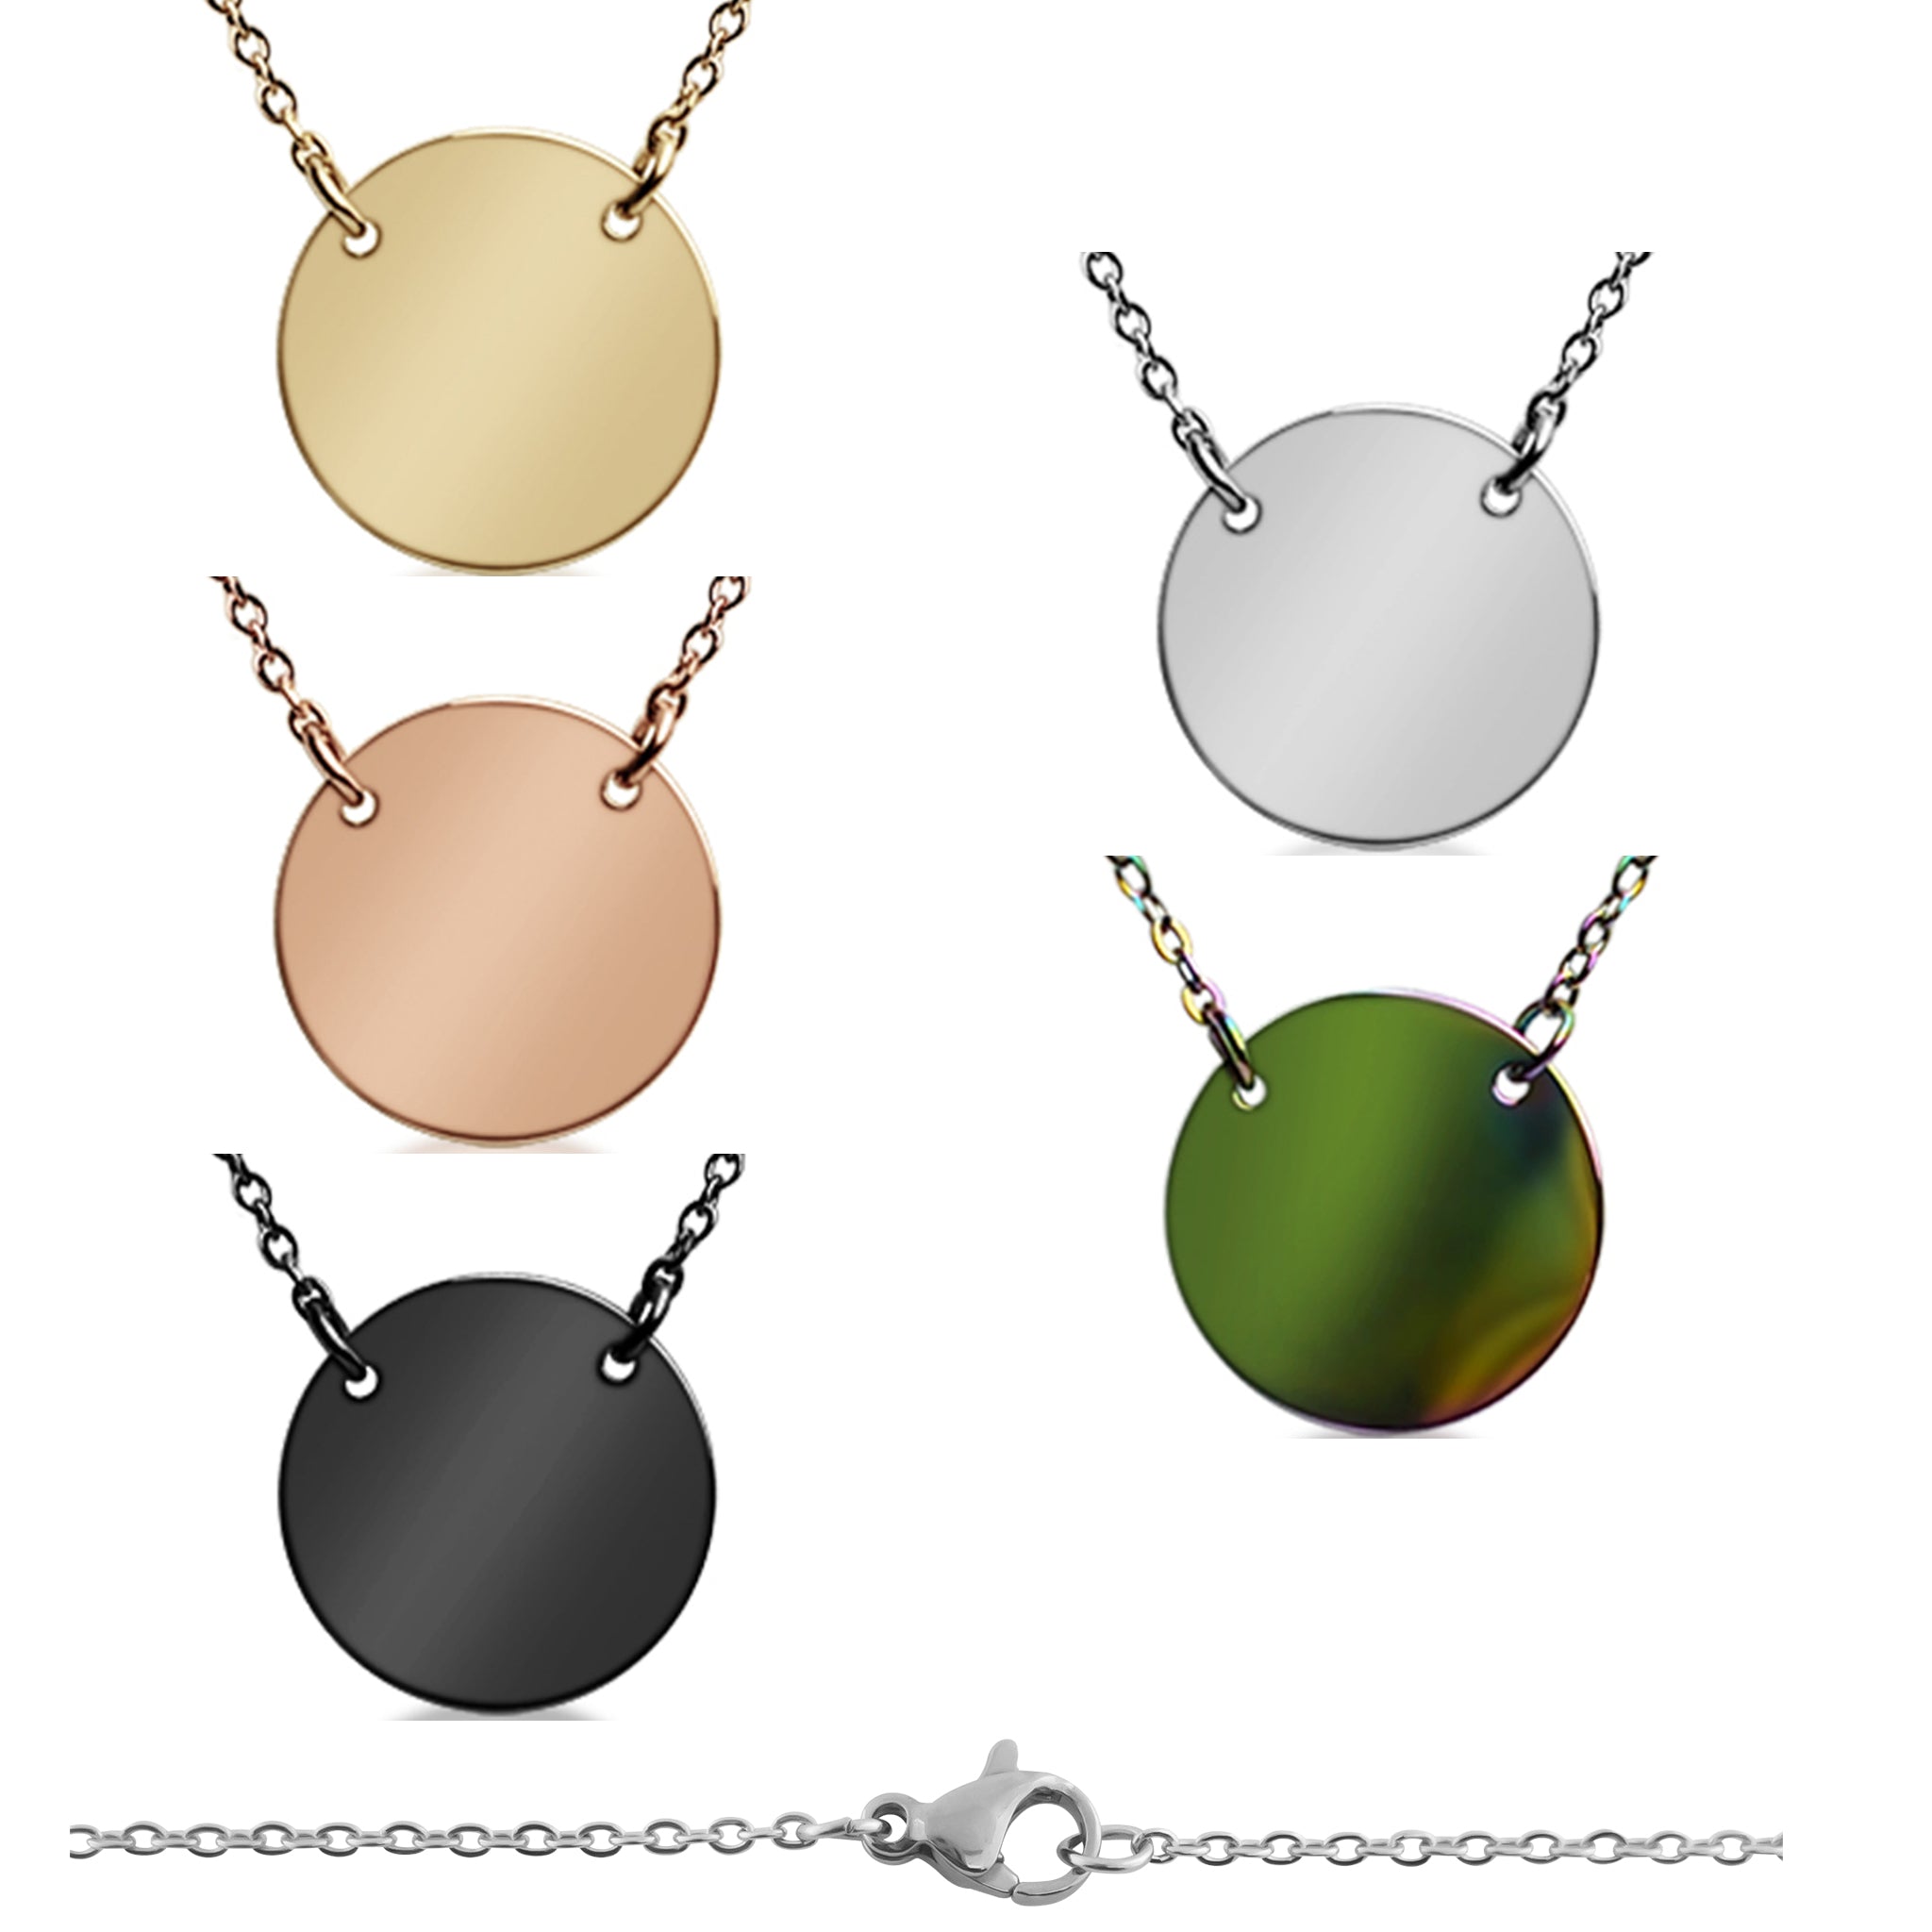 Stainless Steel Blank Circle Necklace / SBB0240